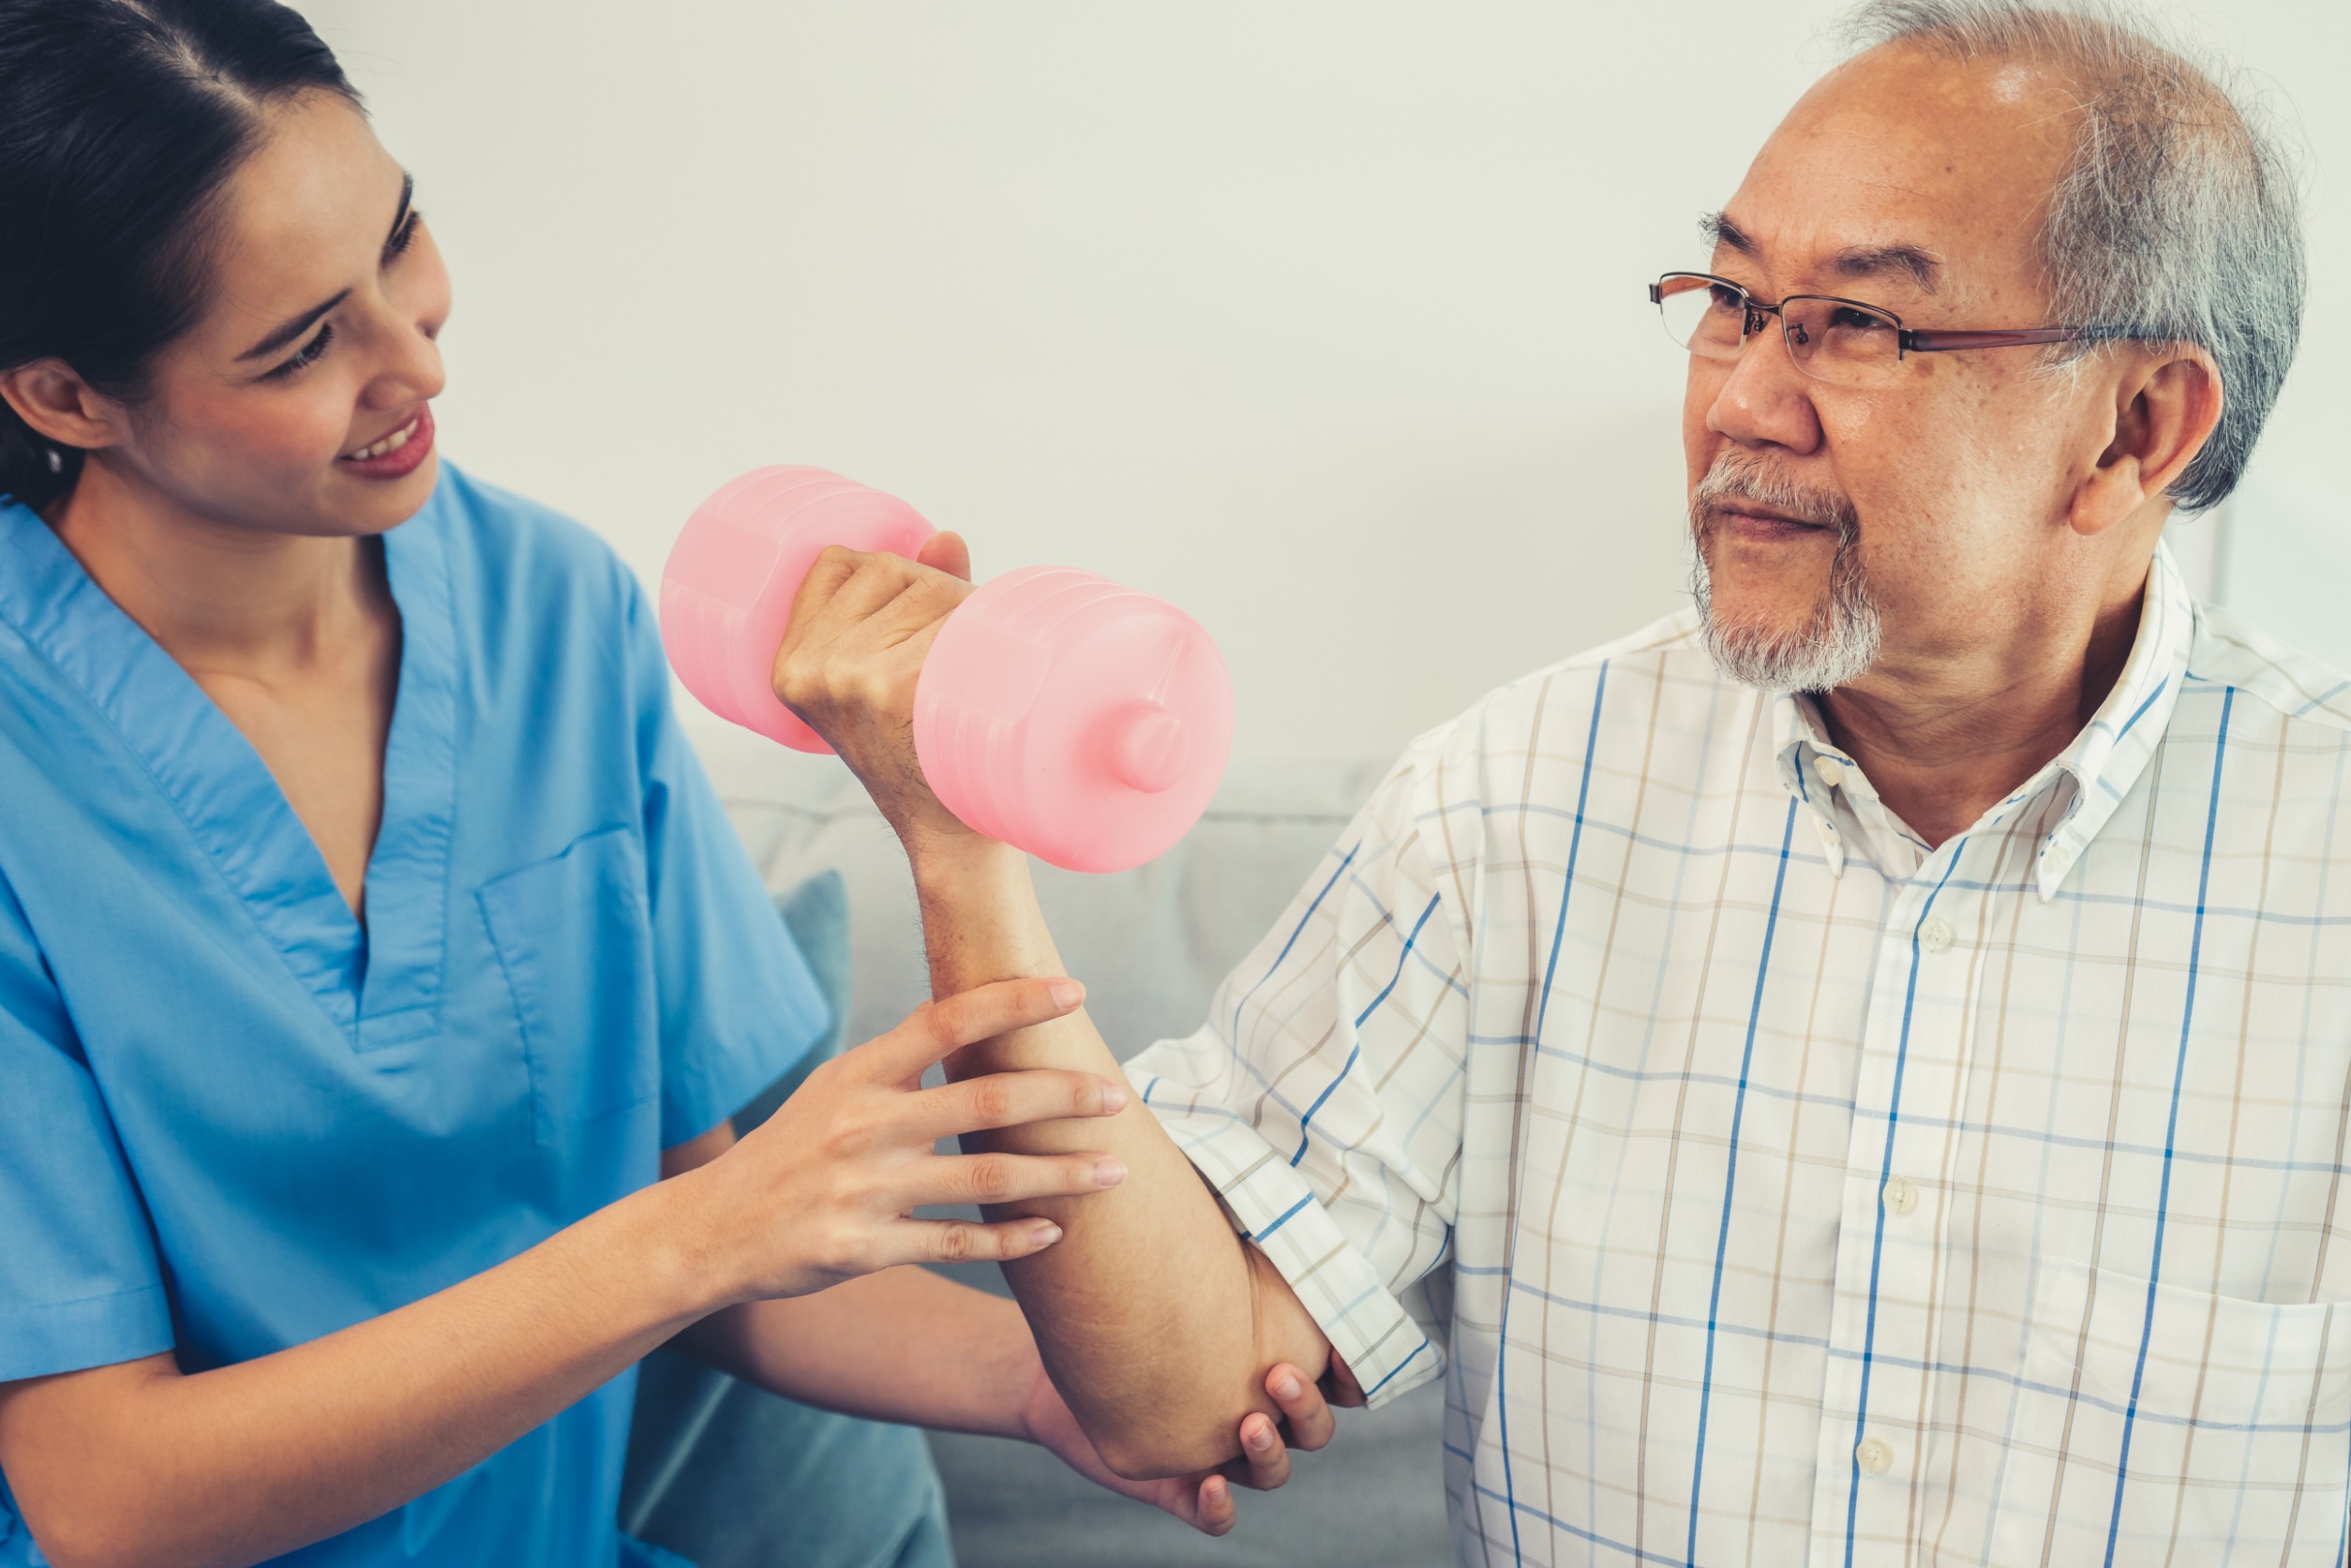 Are You a Physical Therapist Looking for More Independence?